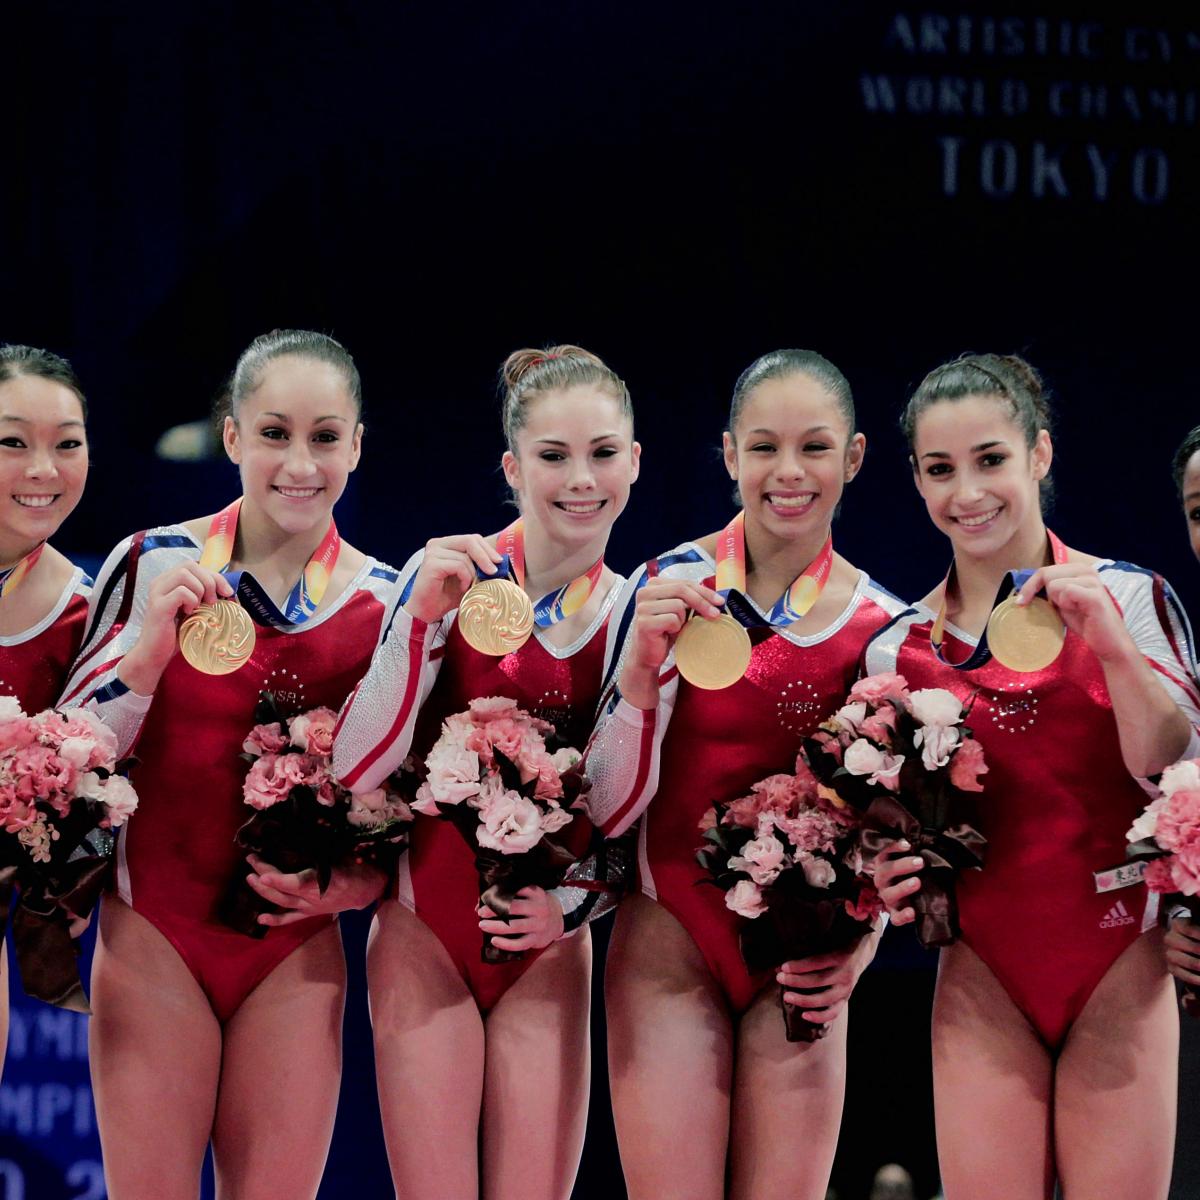 Us Womens Gymnastics Olympic Team 2012 Stars To Shine In Qualifying Stages News Scores 